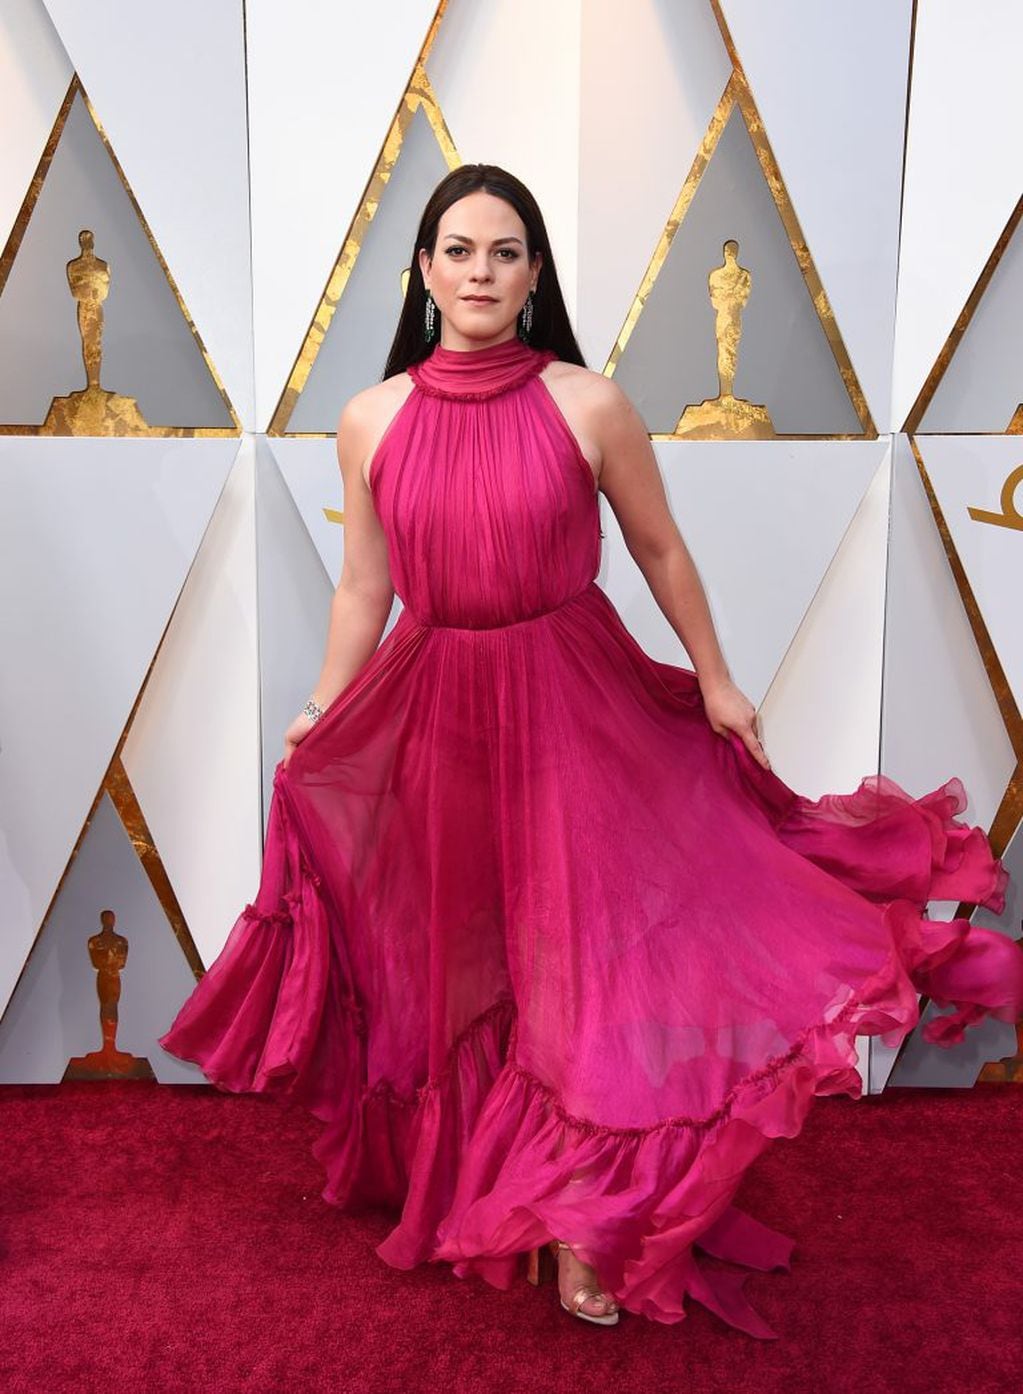 Daniela Vega arrives at the Oscars on Sunday, March 4, 2018, at the Dolby Theatre in Los Angeles. (Photo by Jordan Strauss/Invision/AP)